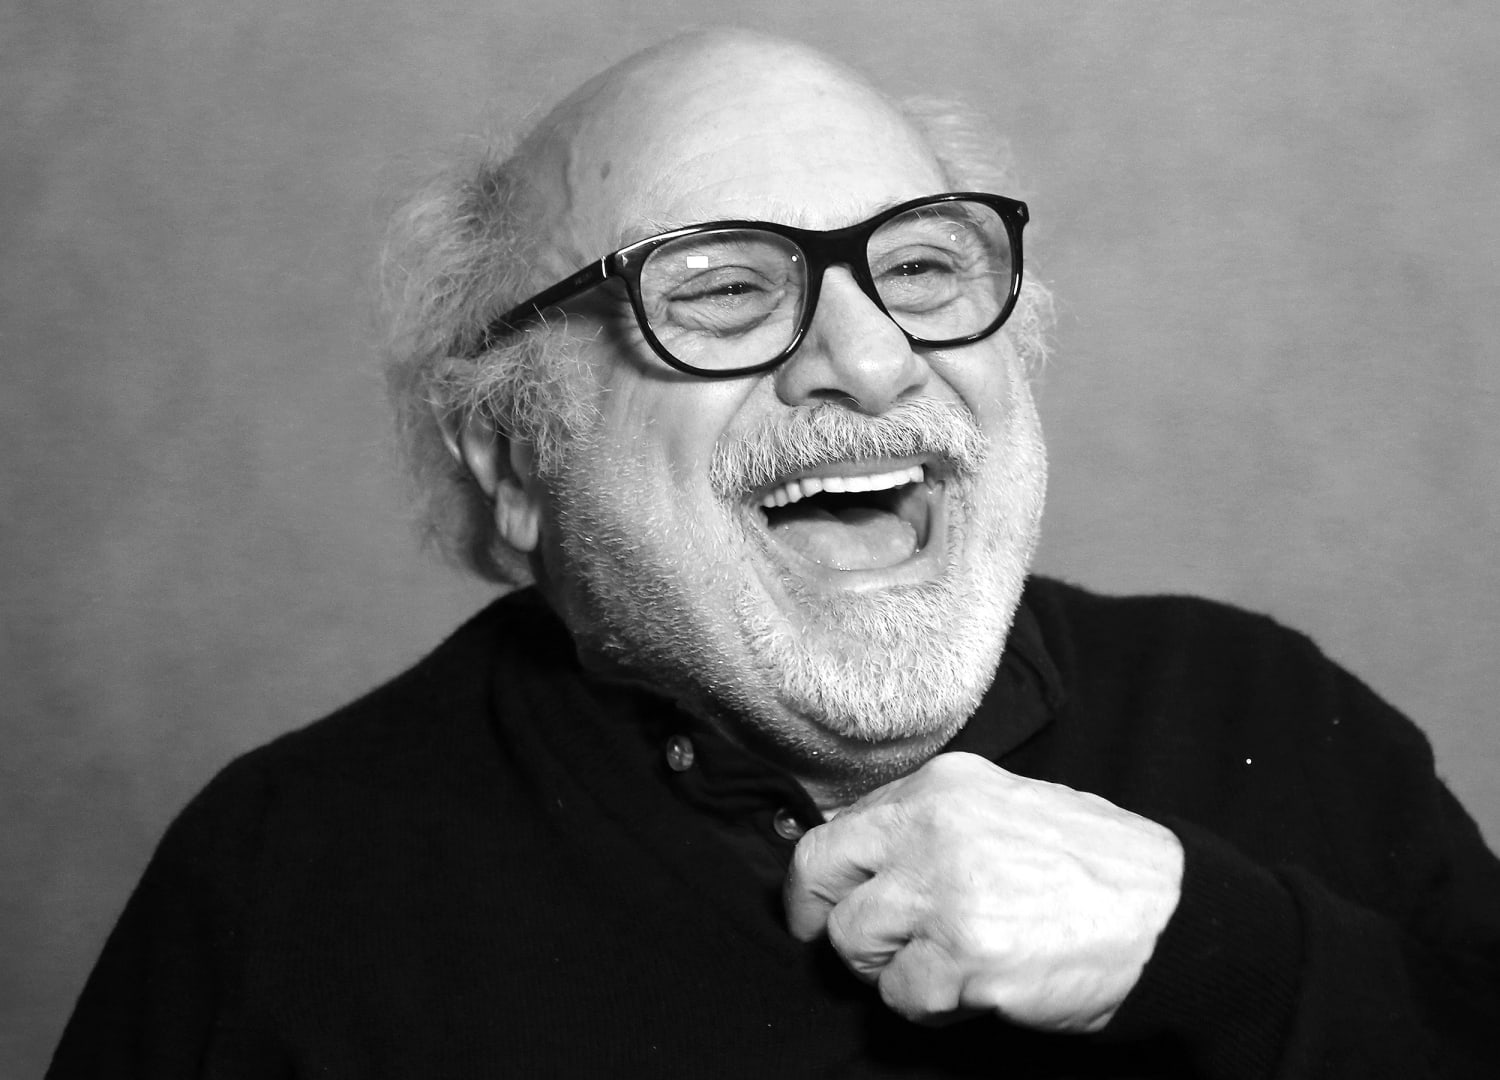 Who is the most unreasonable person in the Danny DeVito cut-out debacle?